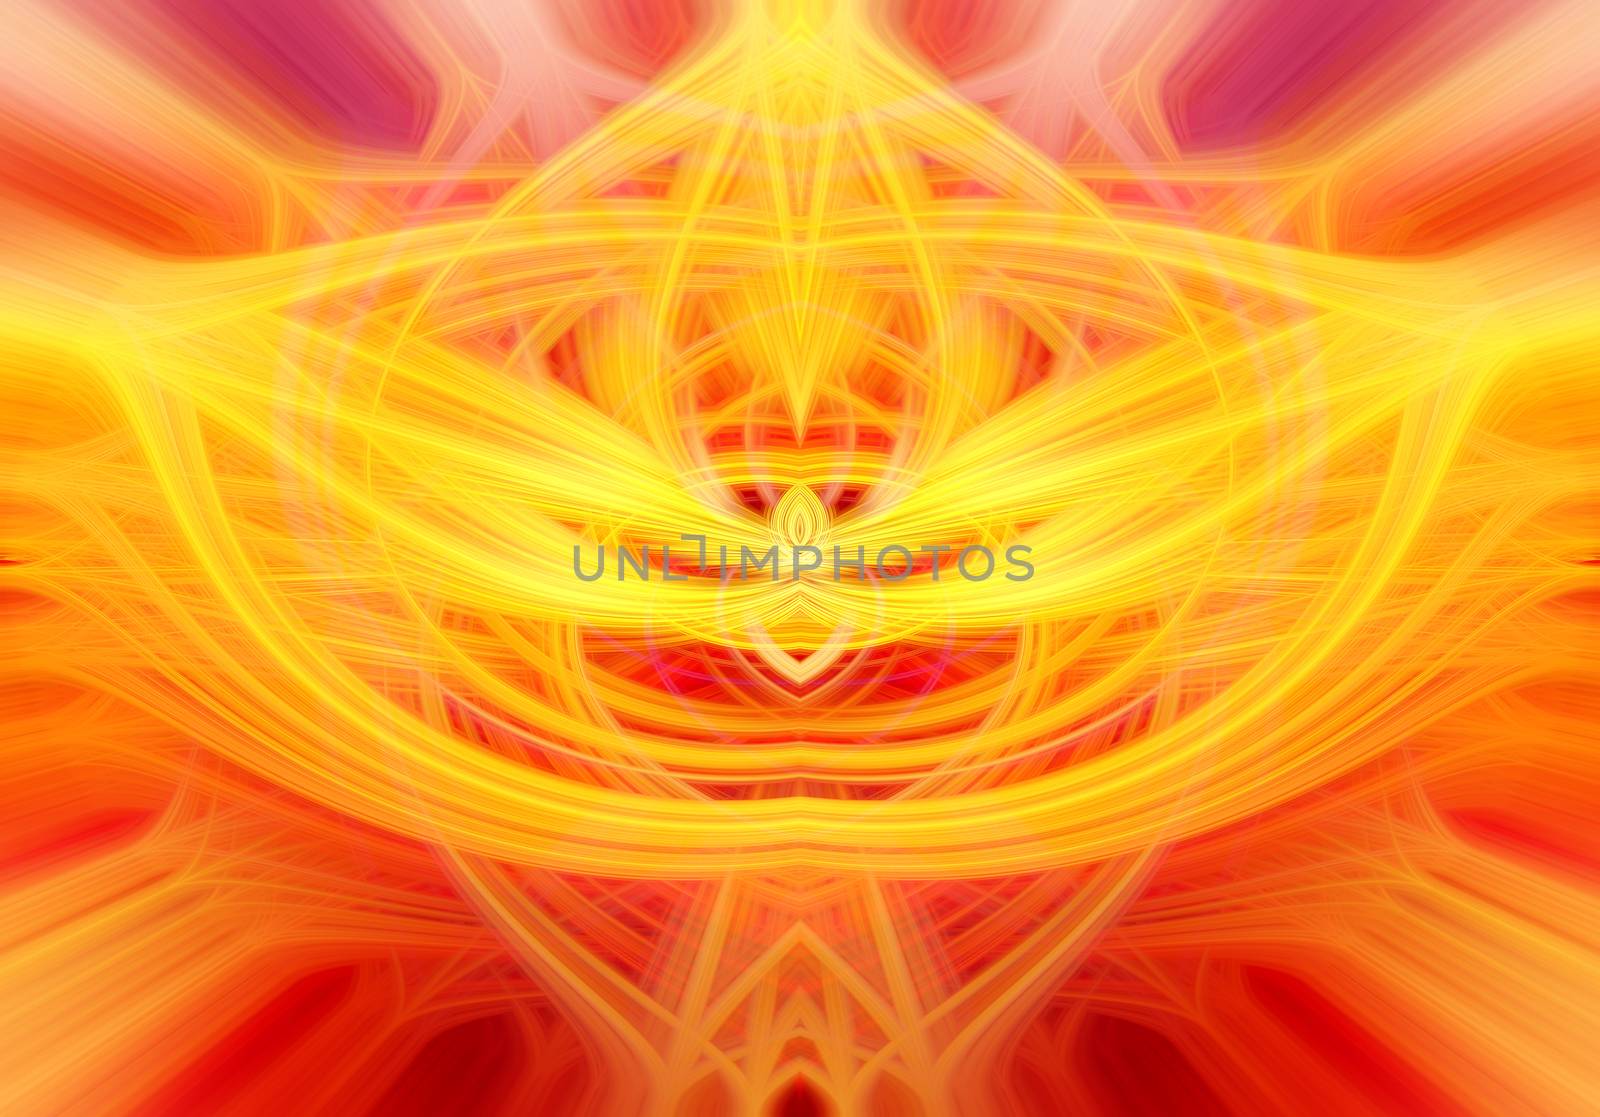 Beautiful abstract intertwined glowing 3d fibers forming a shape of star, sparkle, flame, flower, interlinked hearts. Yellow, orange, and red colors. Illustration by DamantisZ